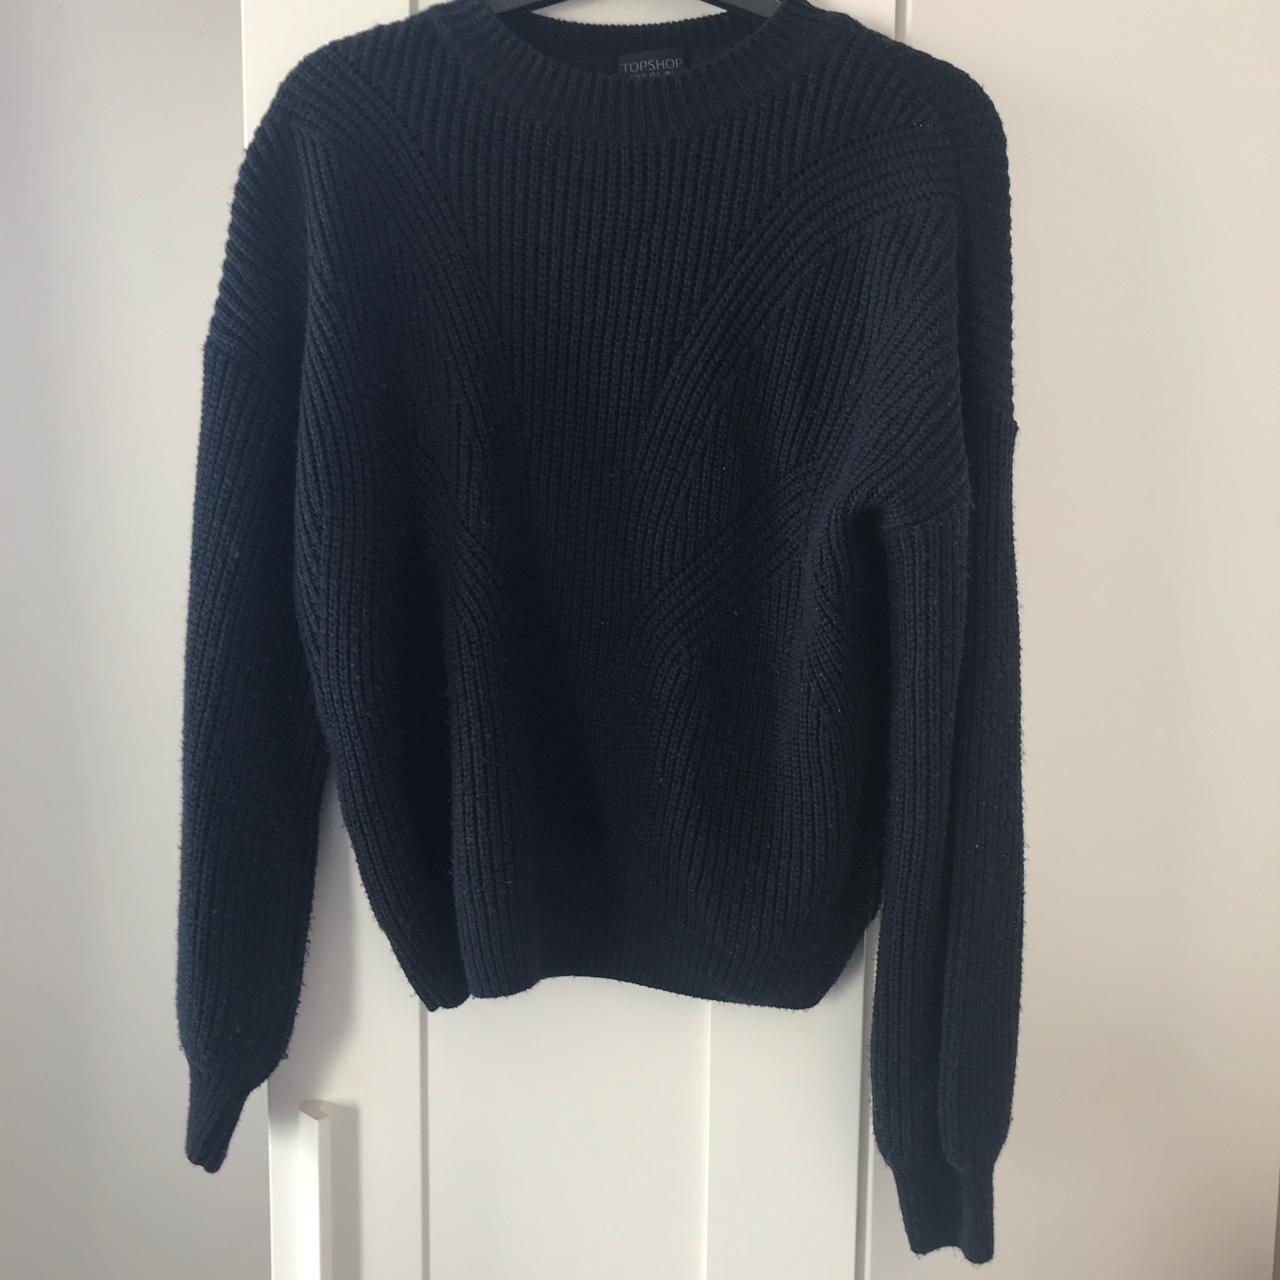 Product Image 1 - TOPSHOP navy blue chunky knitted